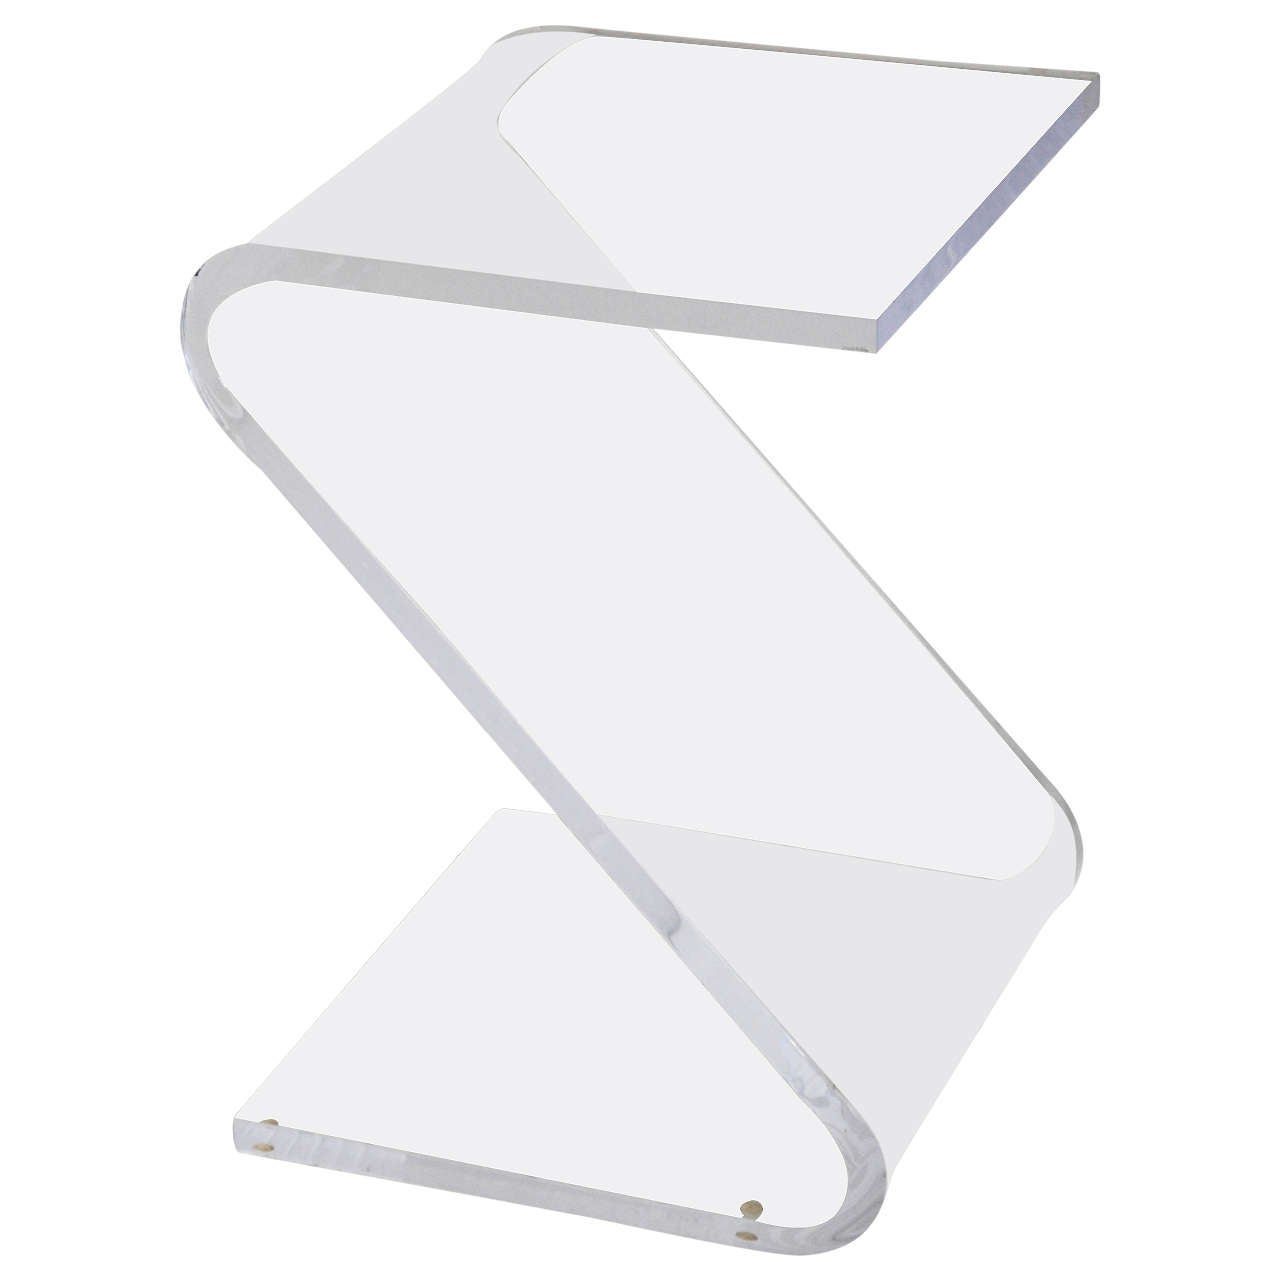 Lucite "Z" Shaped Side Table